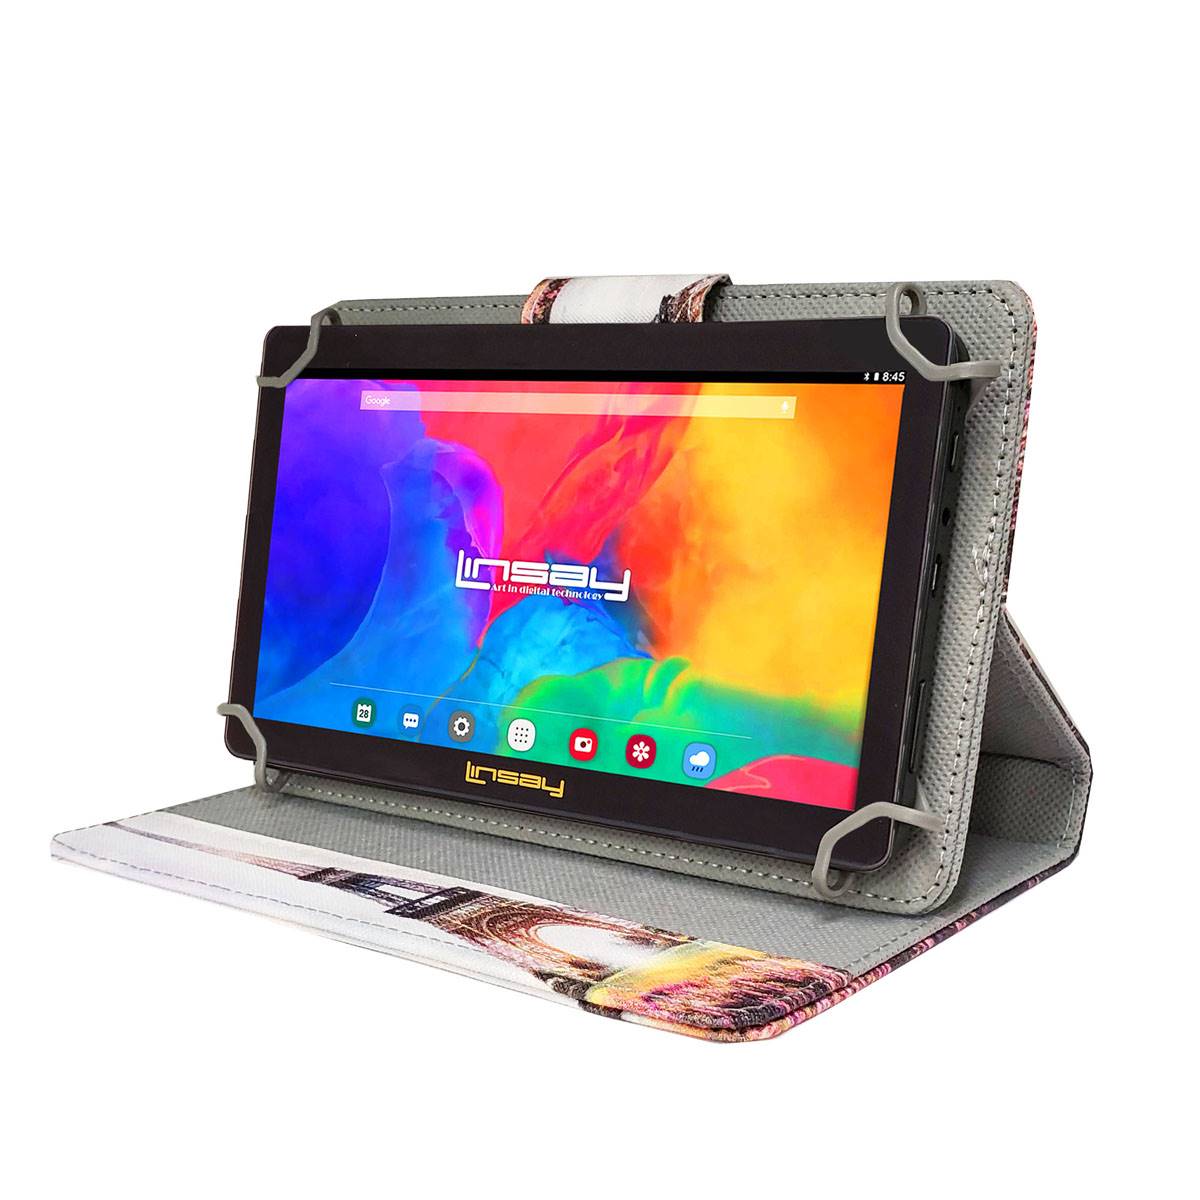 Linsay 7in. Quad Core Tablet With Paris Leather Case